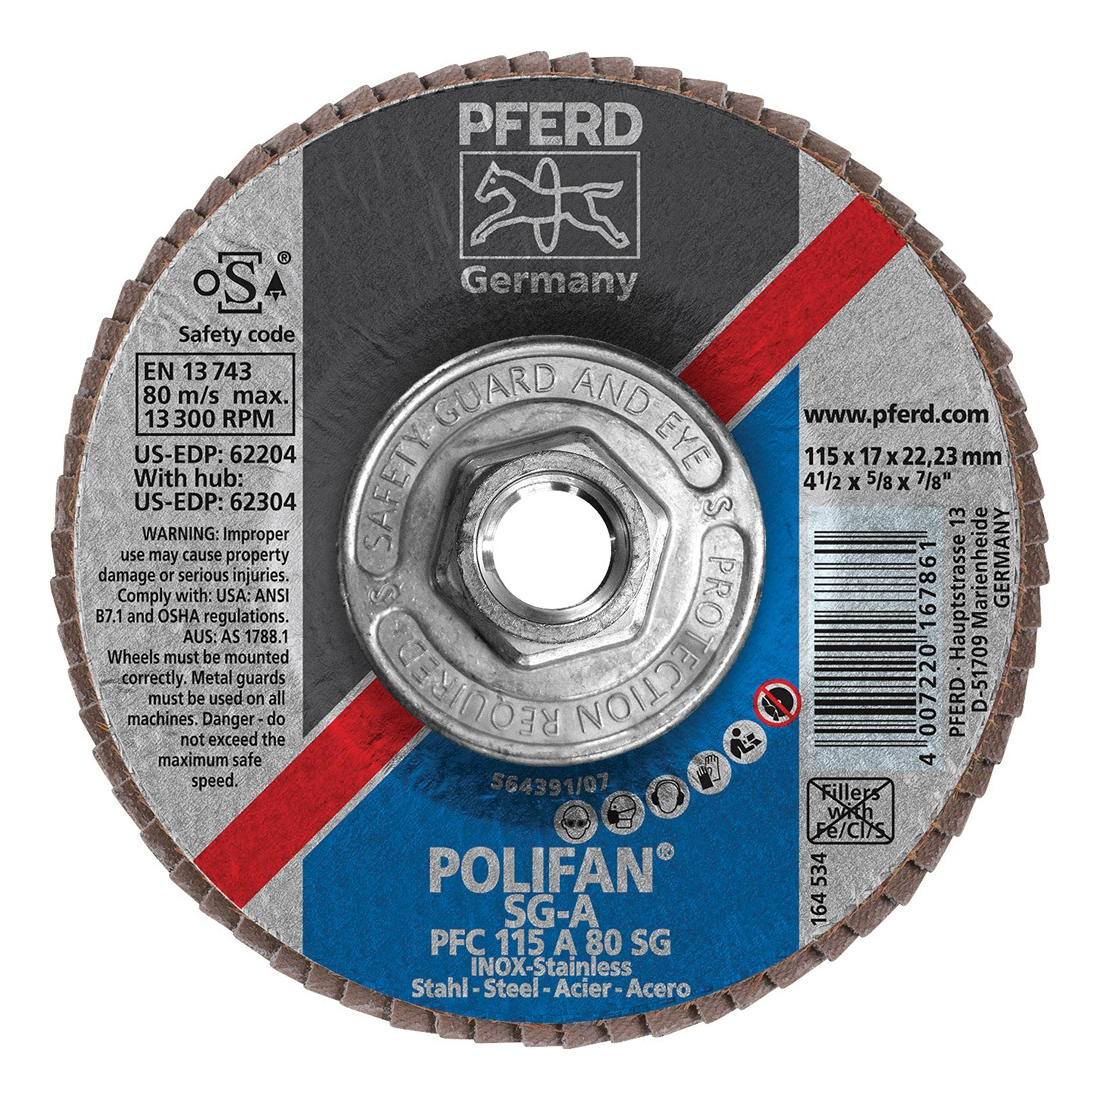 PFERD Polifan® 62304 Performance Line SG A Threaded Coated Abrasive Flap Disc, 4-1/2 in Dia, 80 Grit, Aluminum Oxide Abrasive, Type 29 Conical Disc